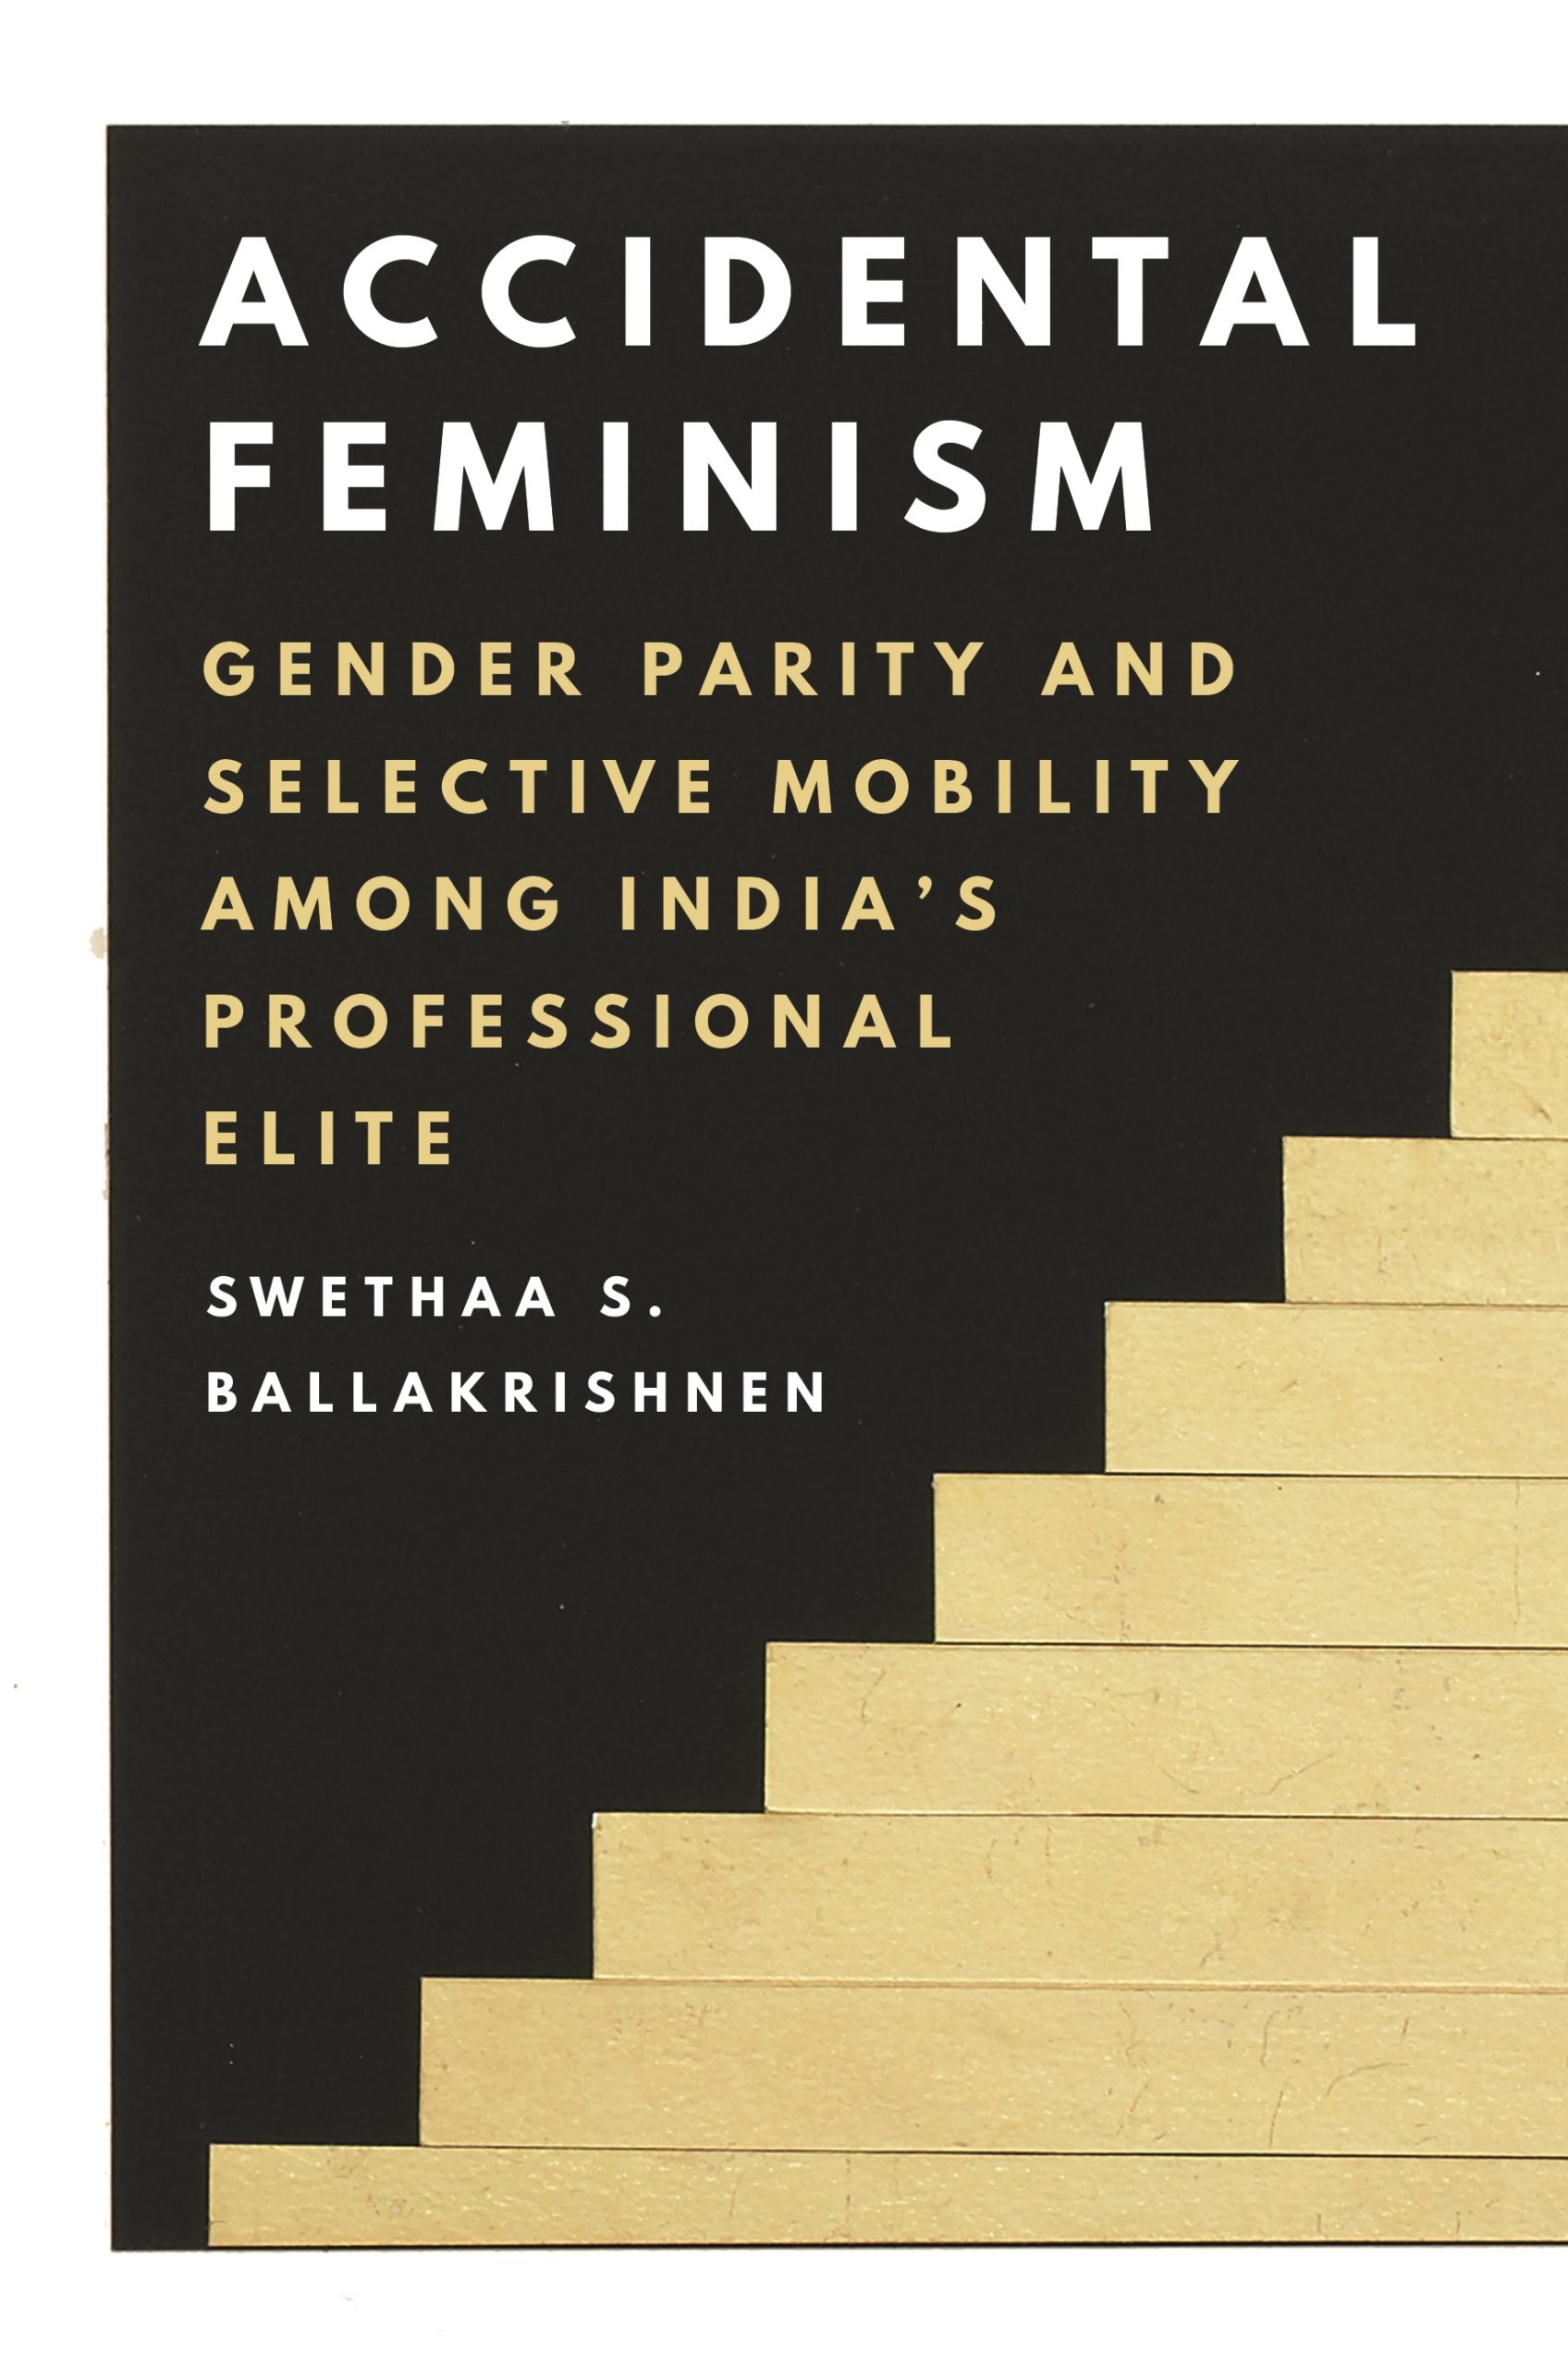 Cover of Accidental Feminism showcases a yellow staircase ascending.